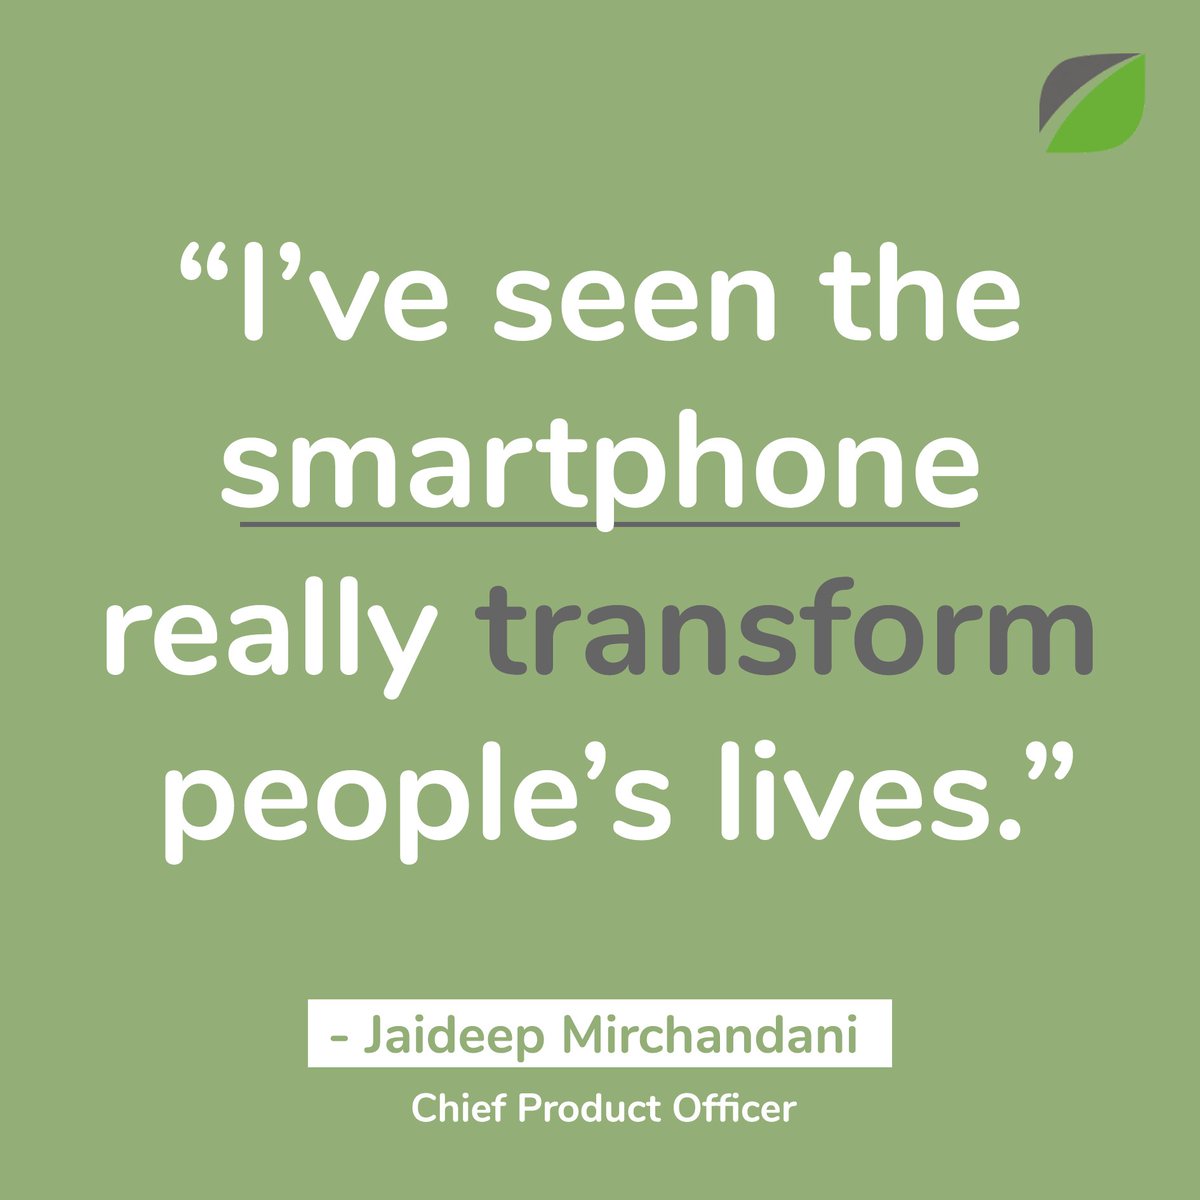 It's true! With our technology smartphones transform people's lives by providing them credit opportunities.